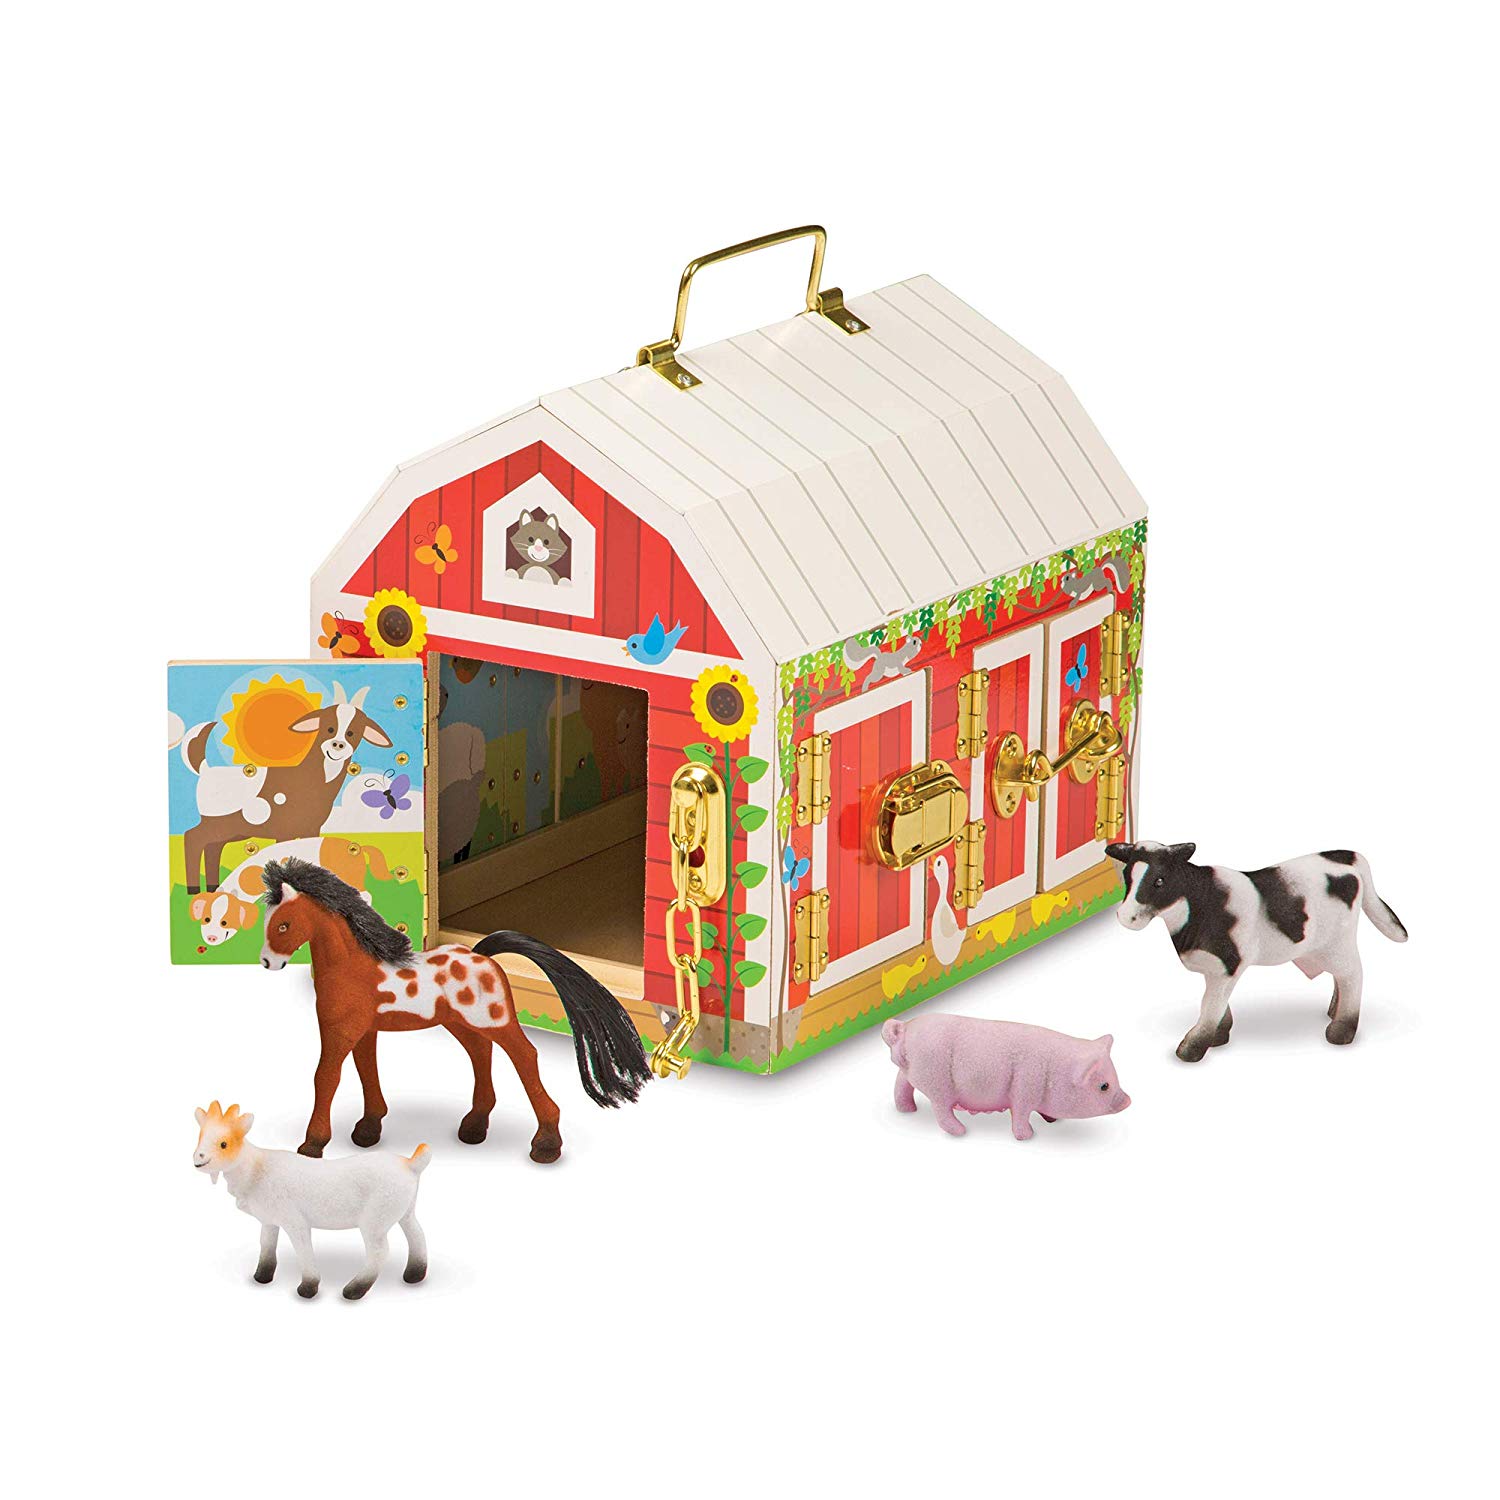 Melissa & Doug 12564 Wooden Barn With Touch